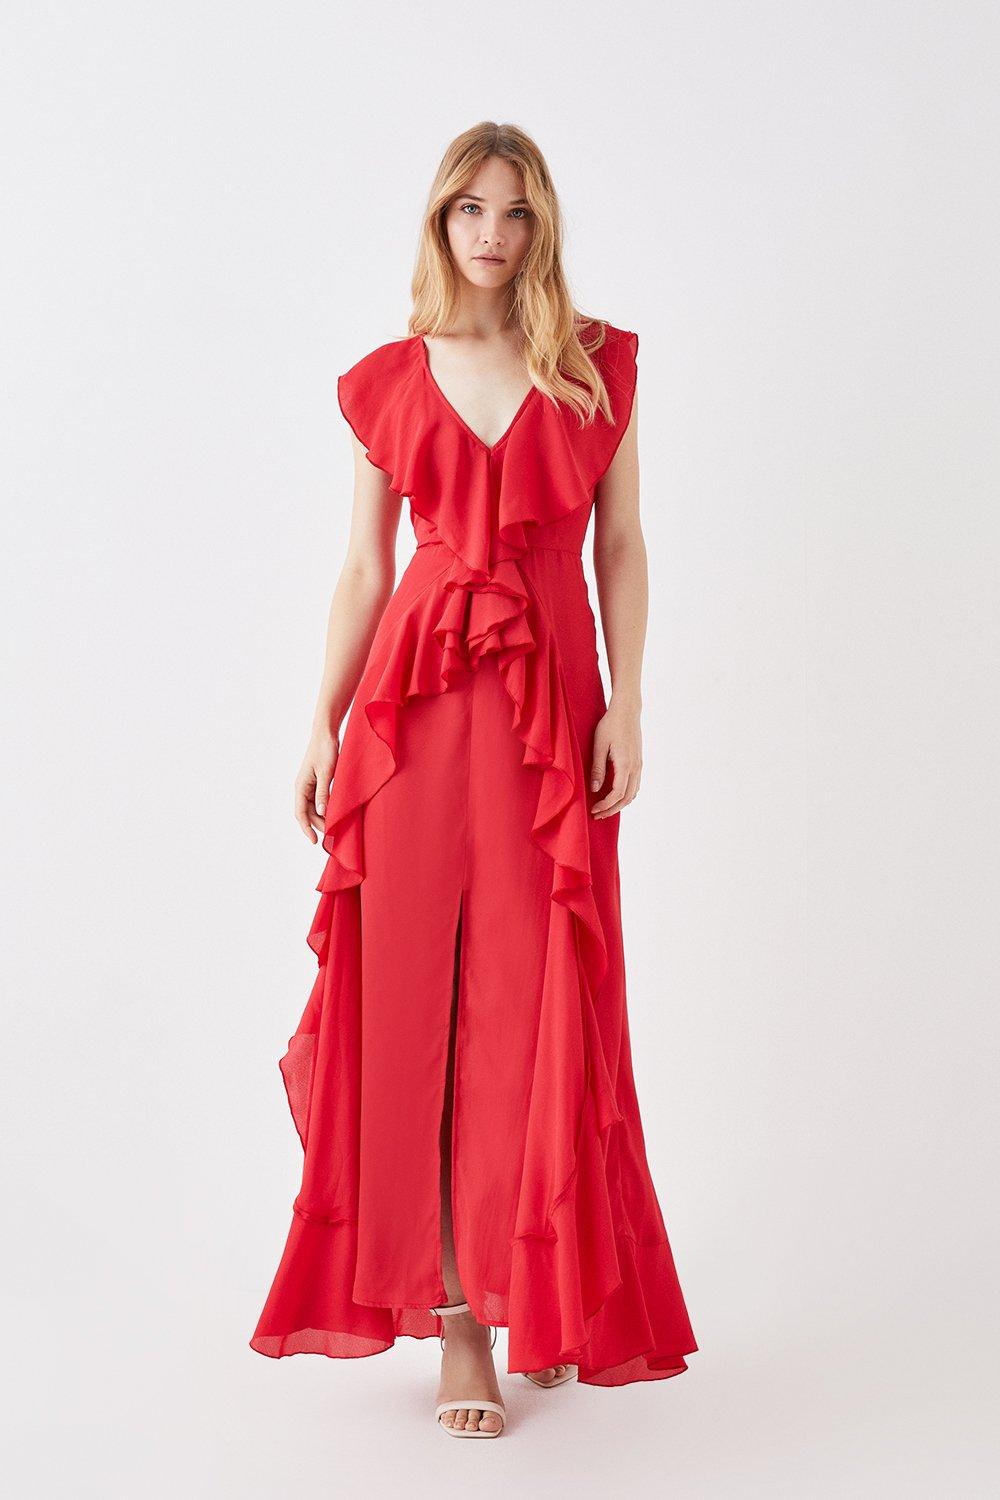 Sophie Habboo Ruffle Front Maxi Dress - Red